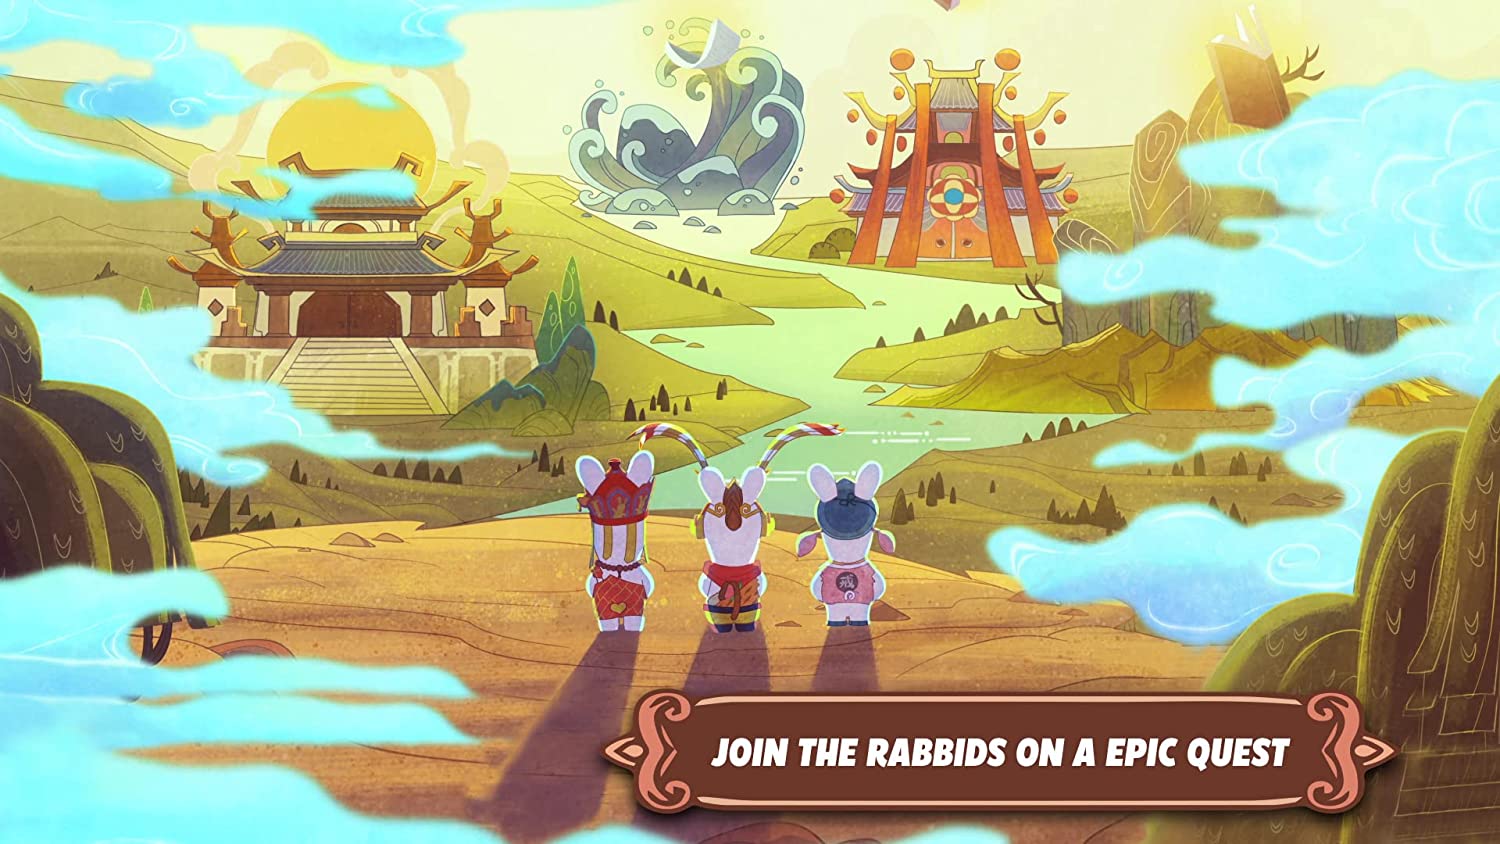 RABBIDS PARTY OF LEGENDS